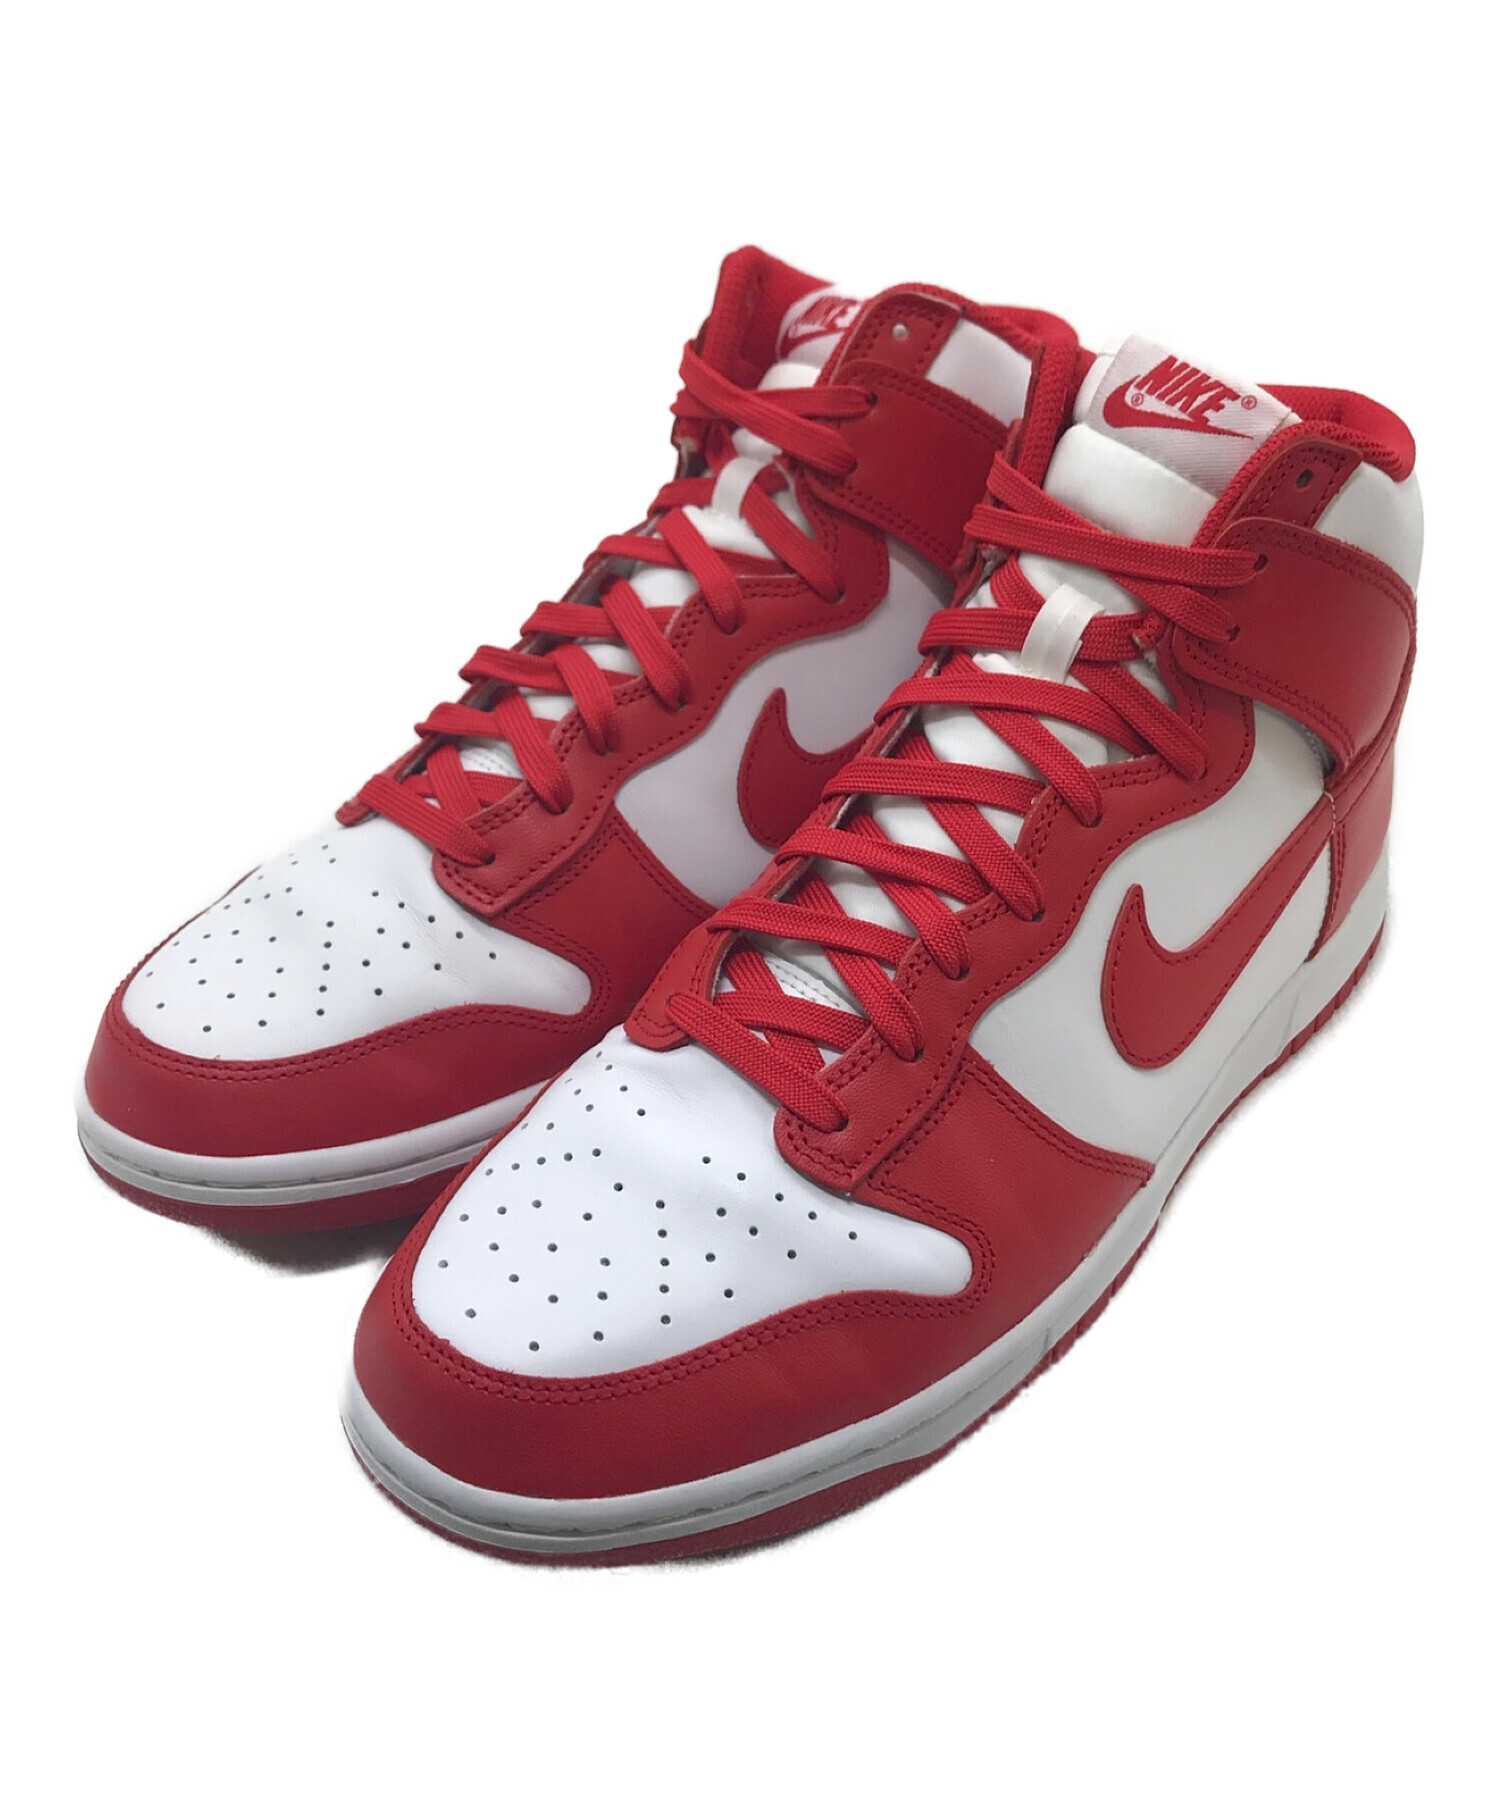 Nike Dunk Championship White and Red